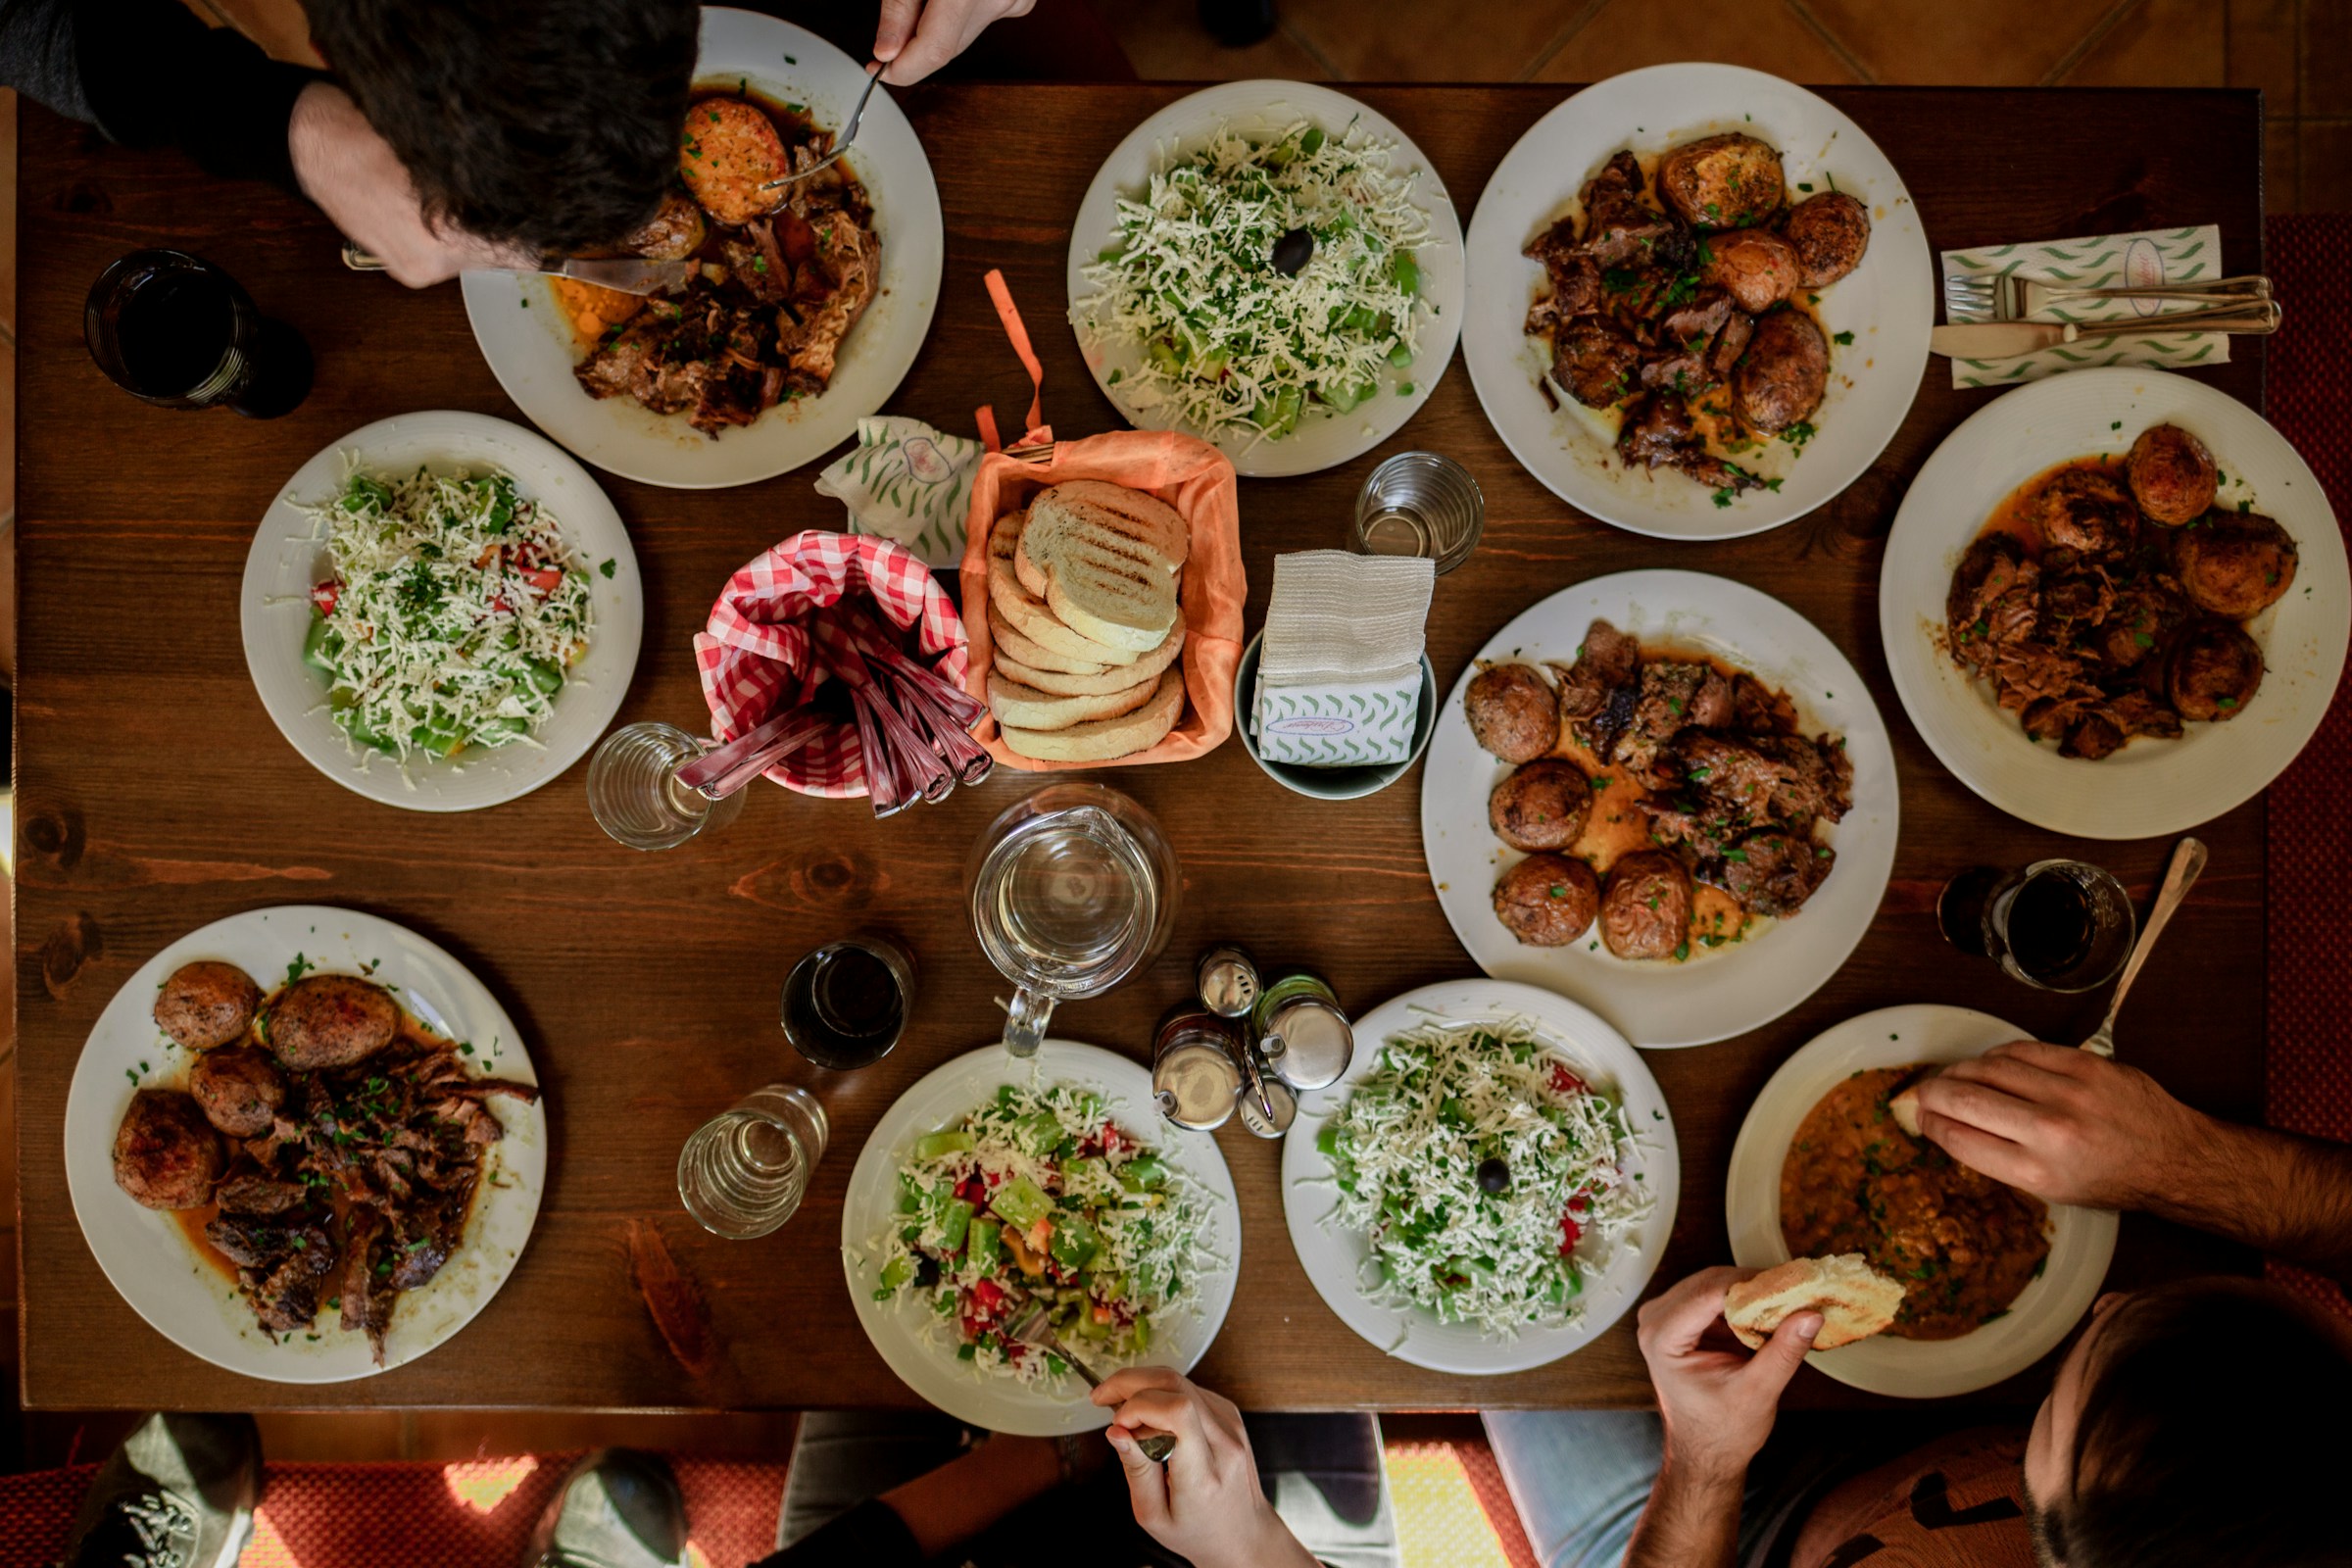 A table full of food | Source: Unsplash